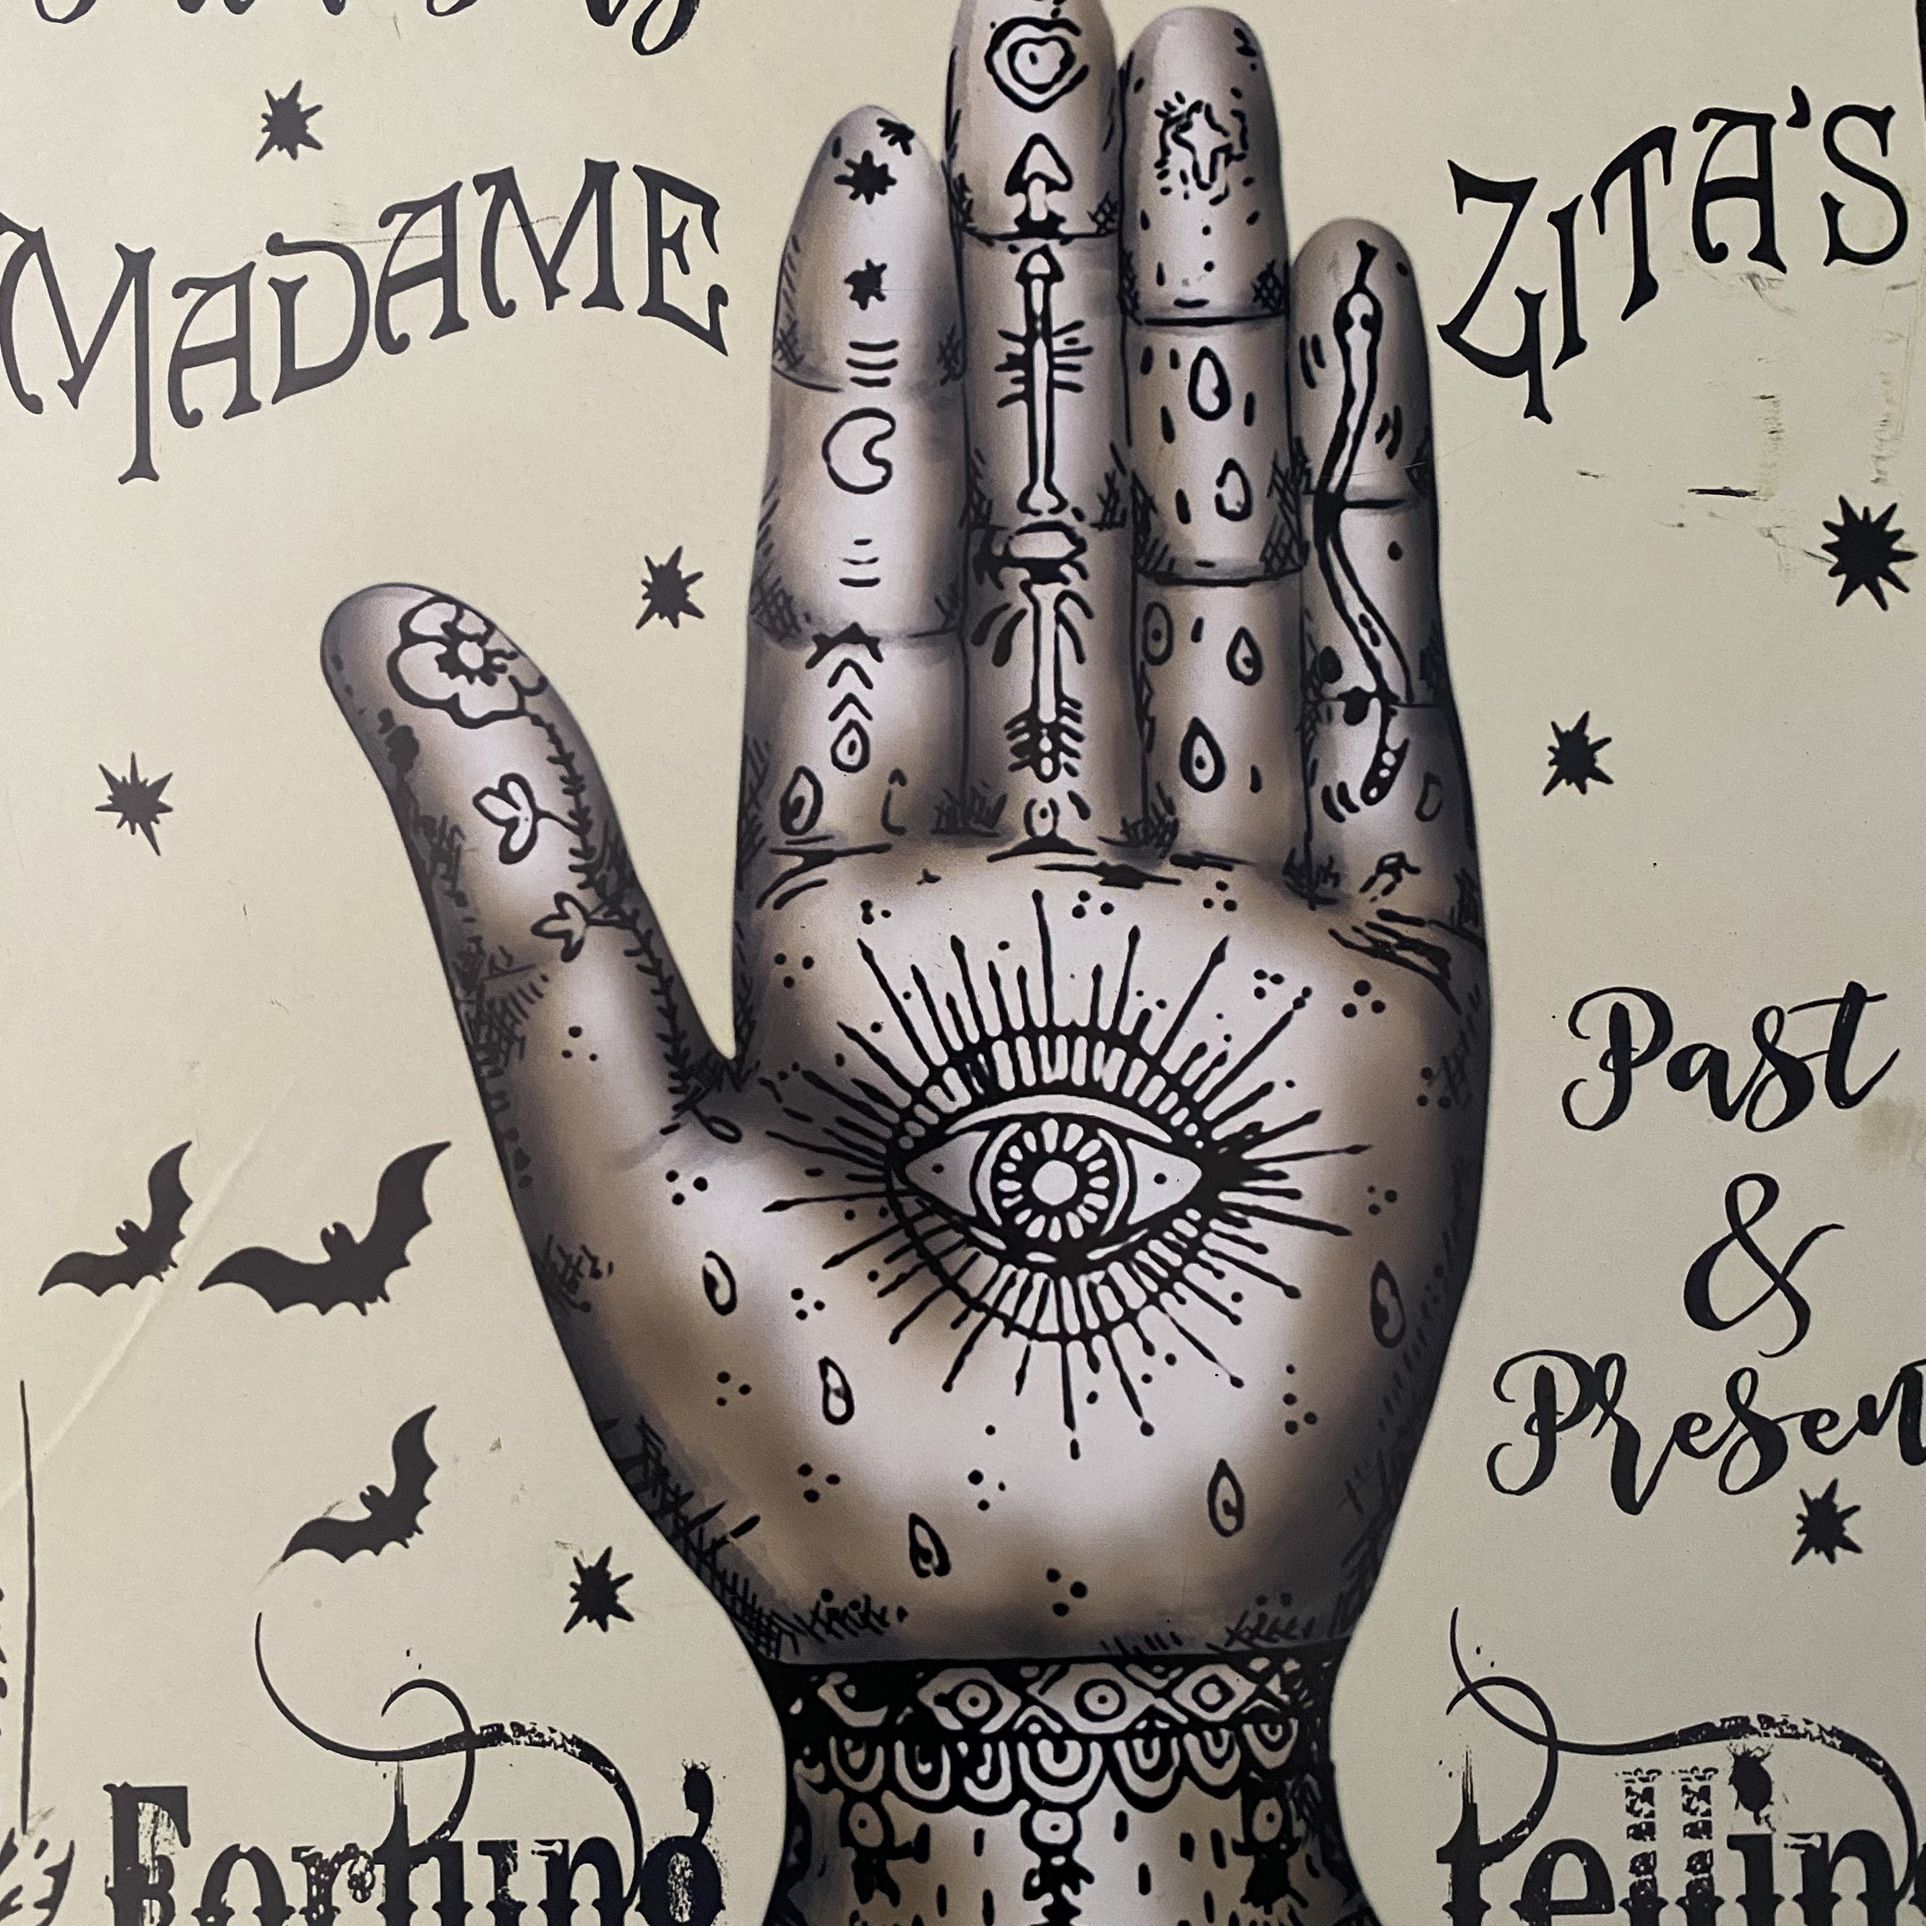 Whether You Read Palms or do Henna or Simply Like Mystical Items, This Is Just a  Charming Palmist Sign With The “All Seeing Eye” 